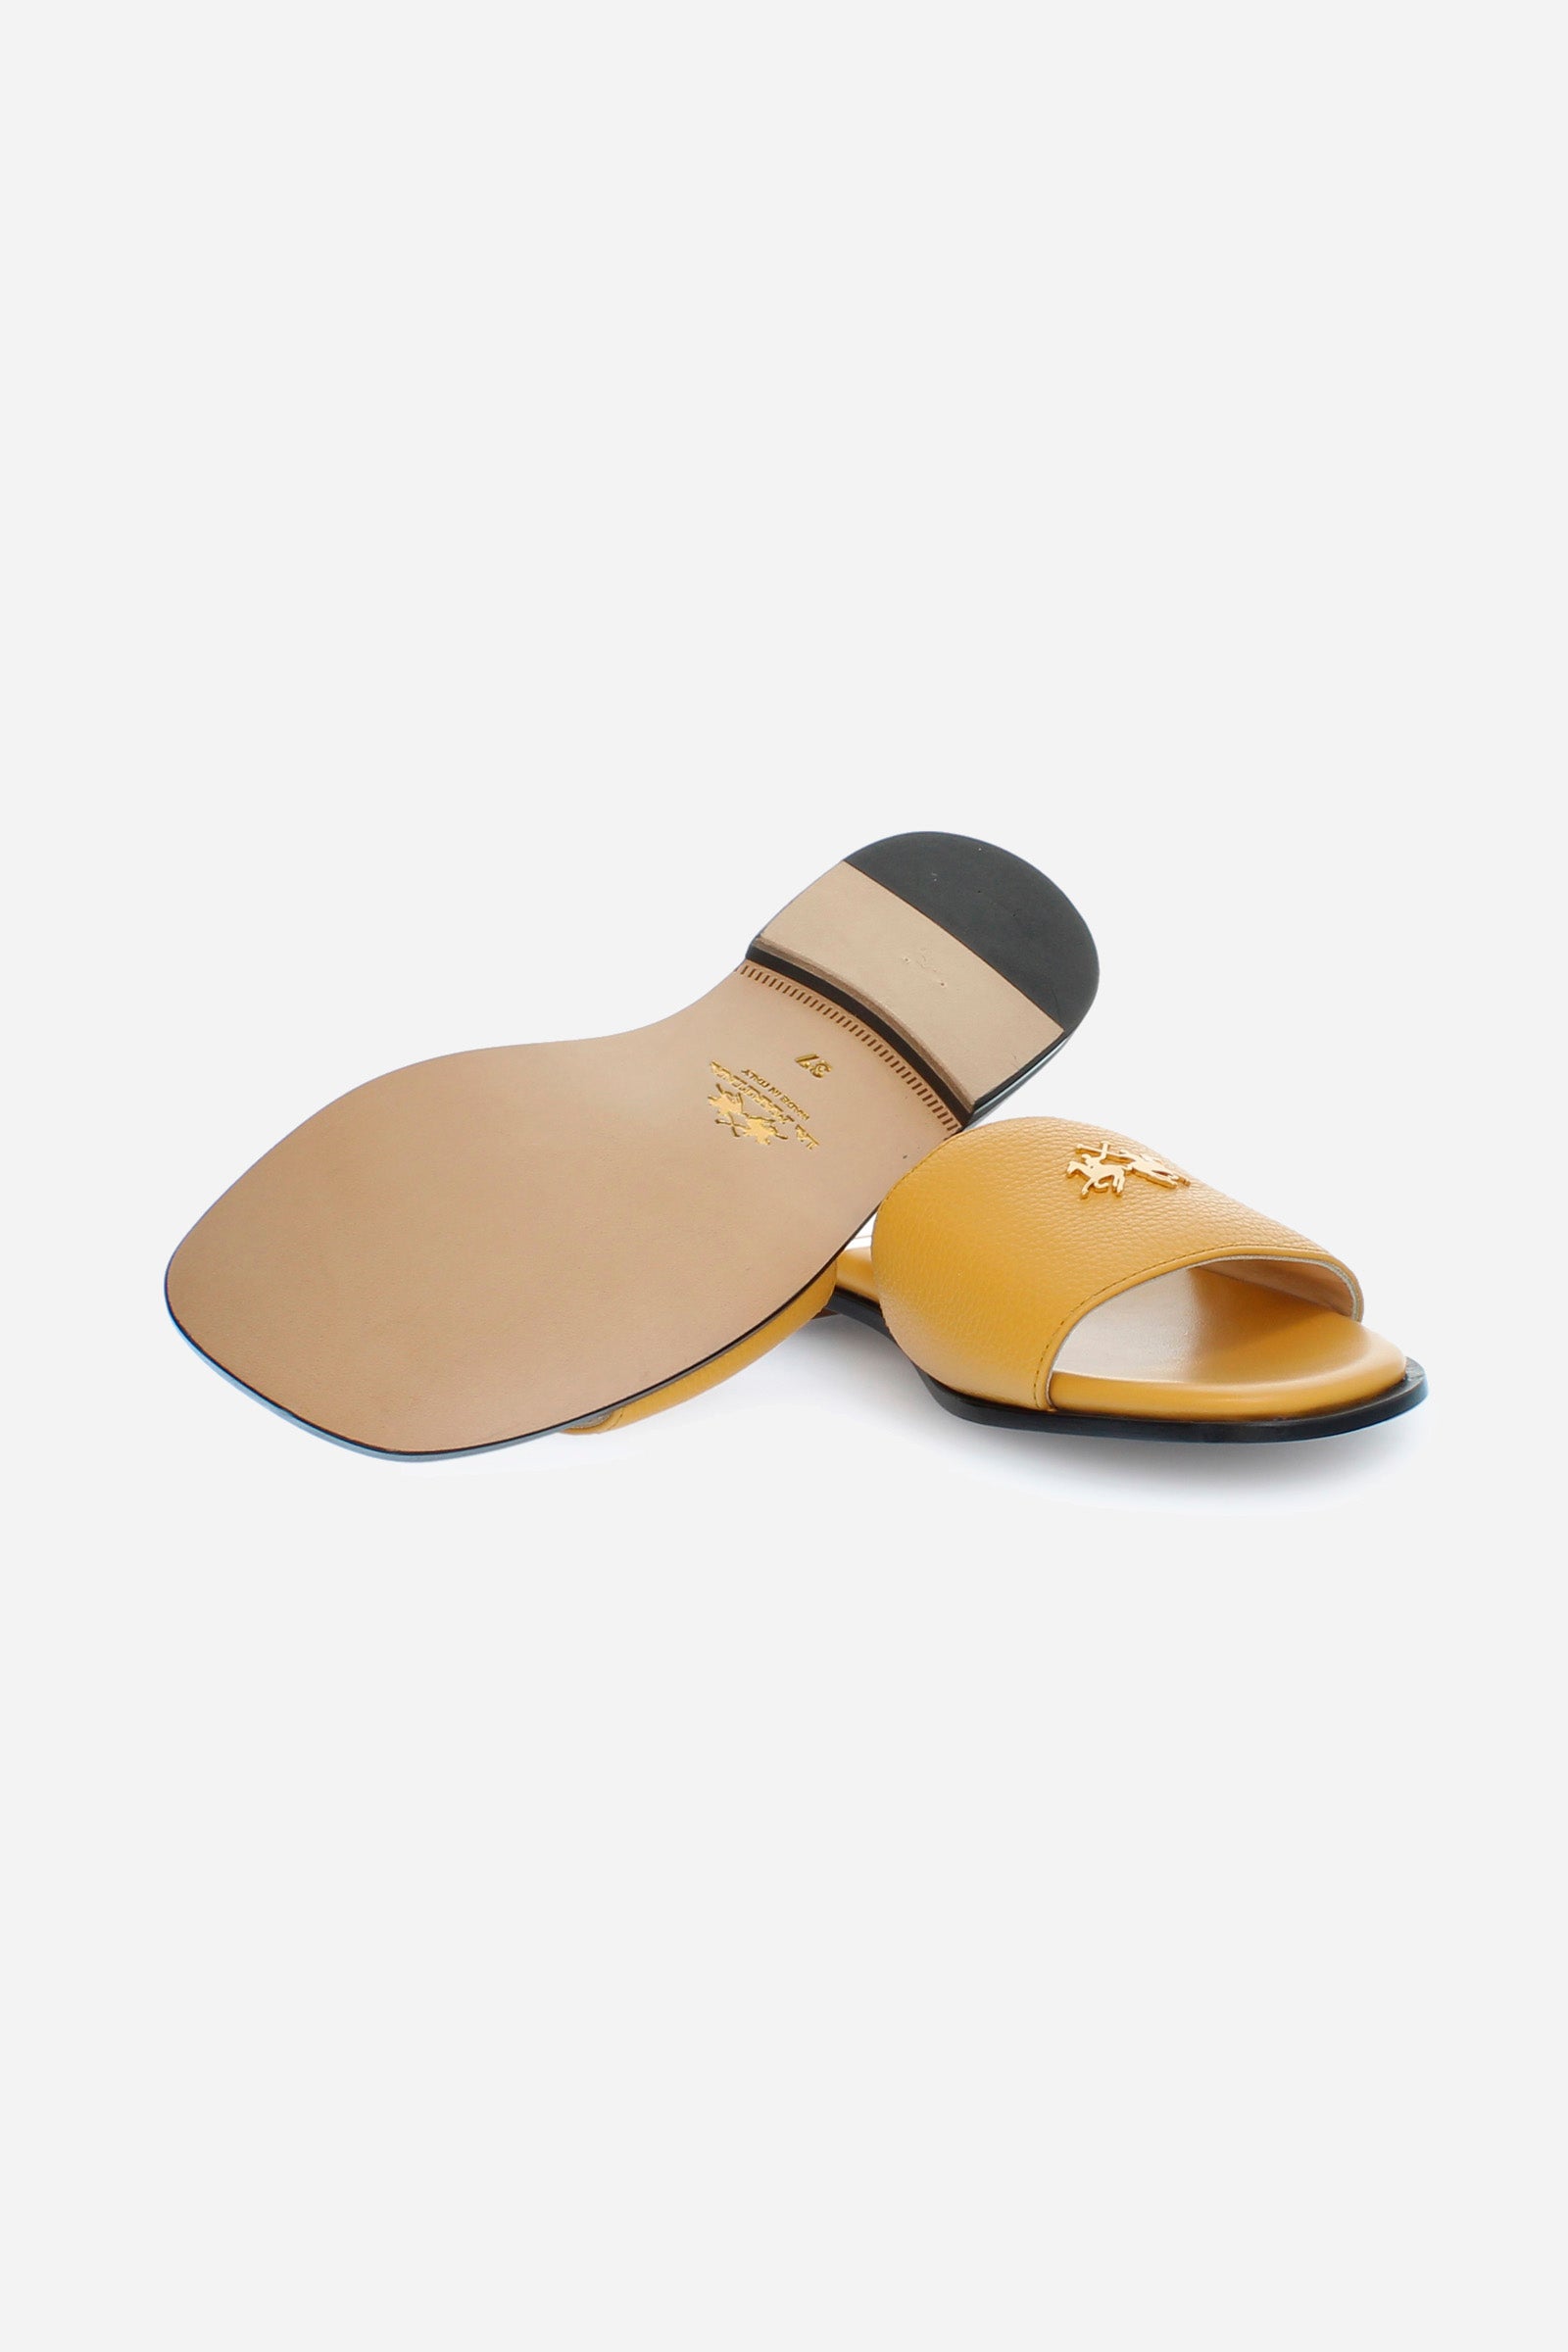 Women's sandals in leather